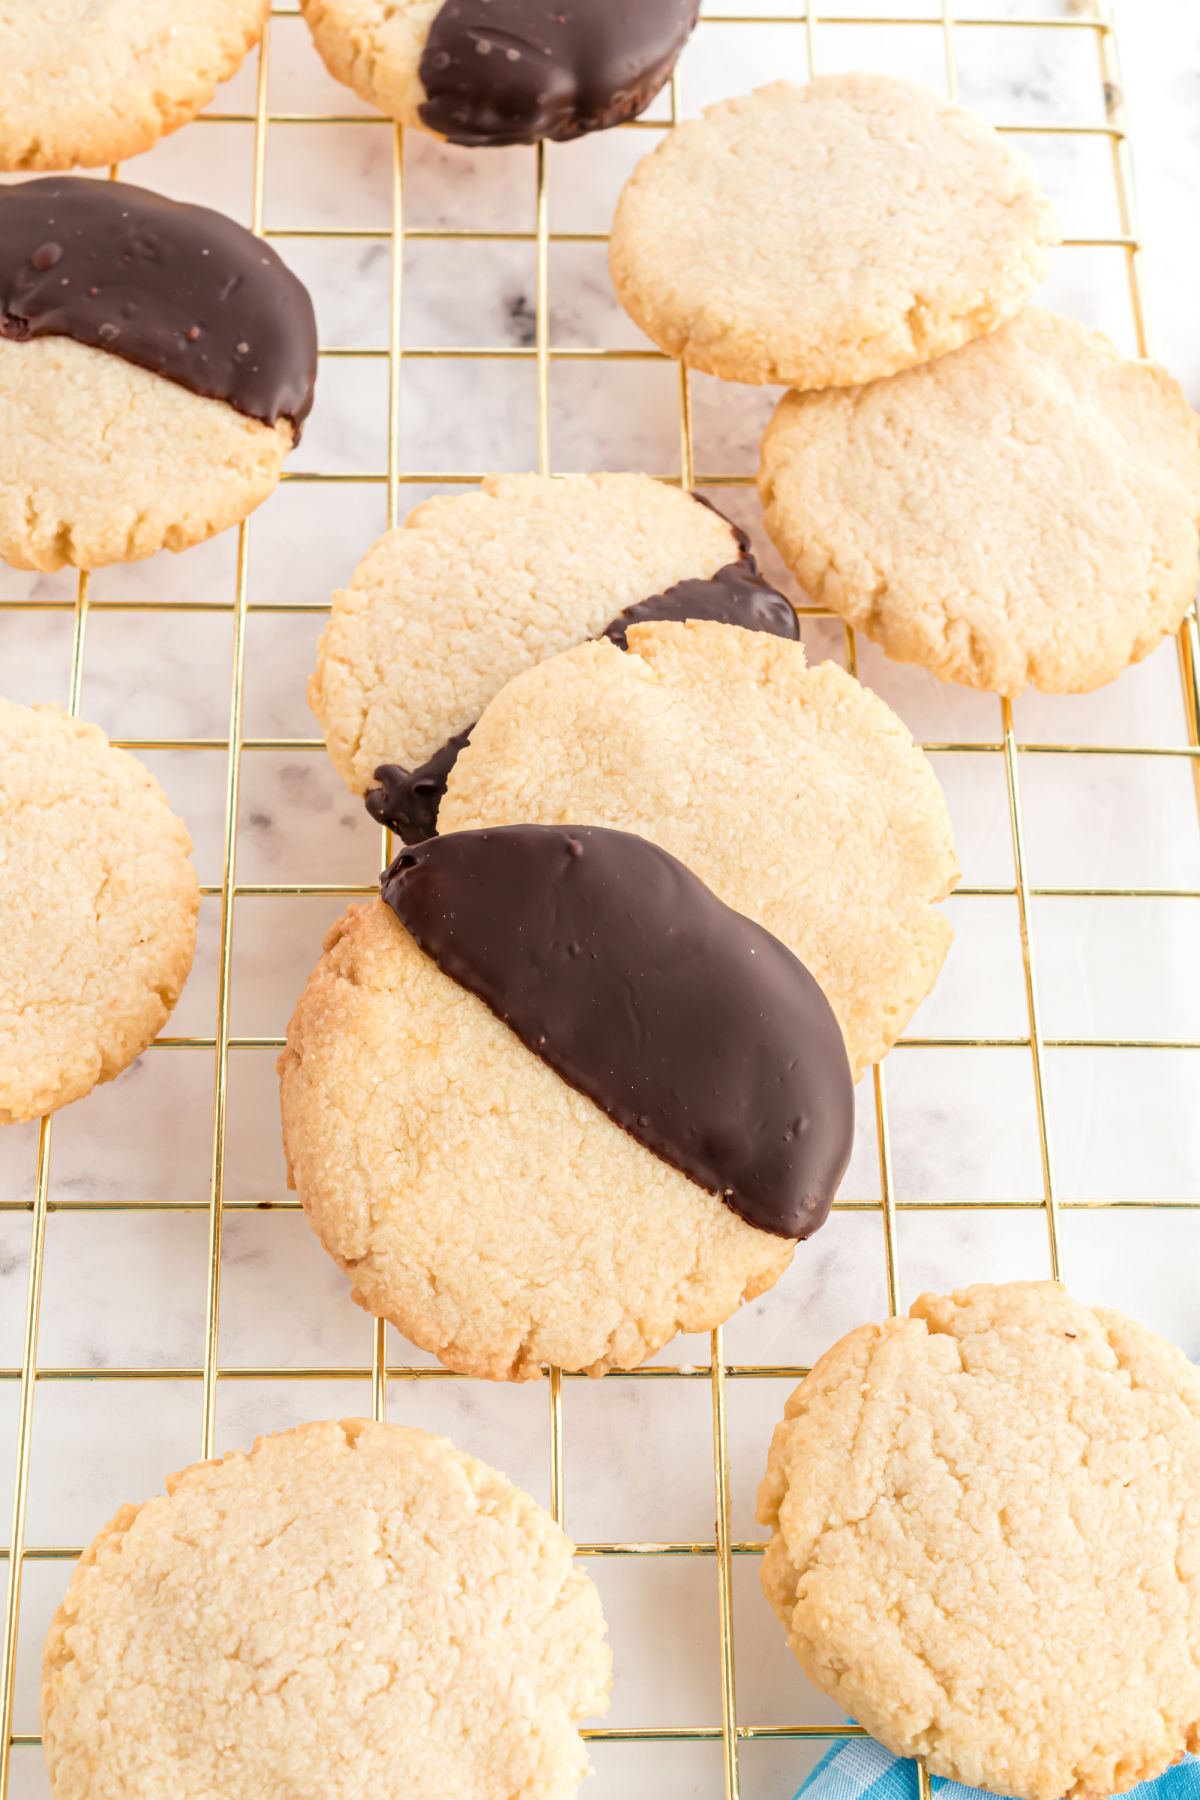 Shortbread cookies on wire cooling rack, some dipped in chocolate.